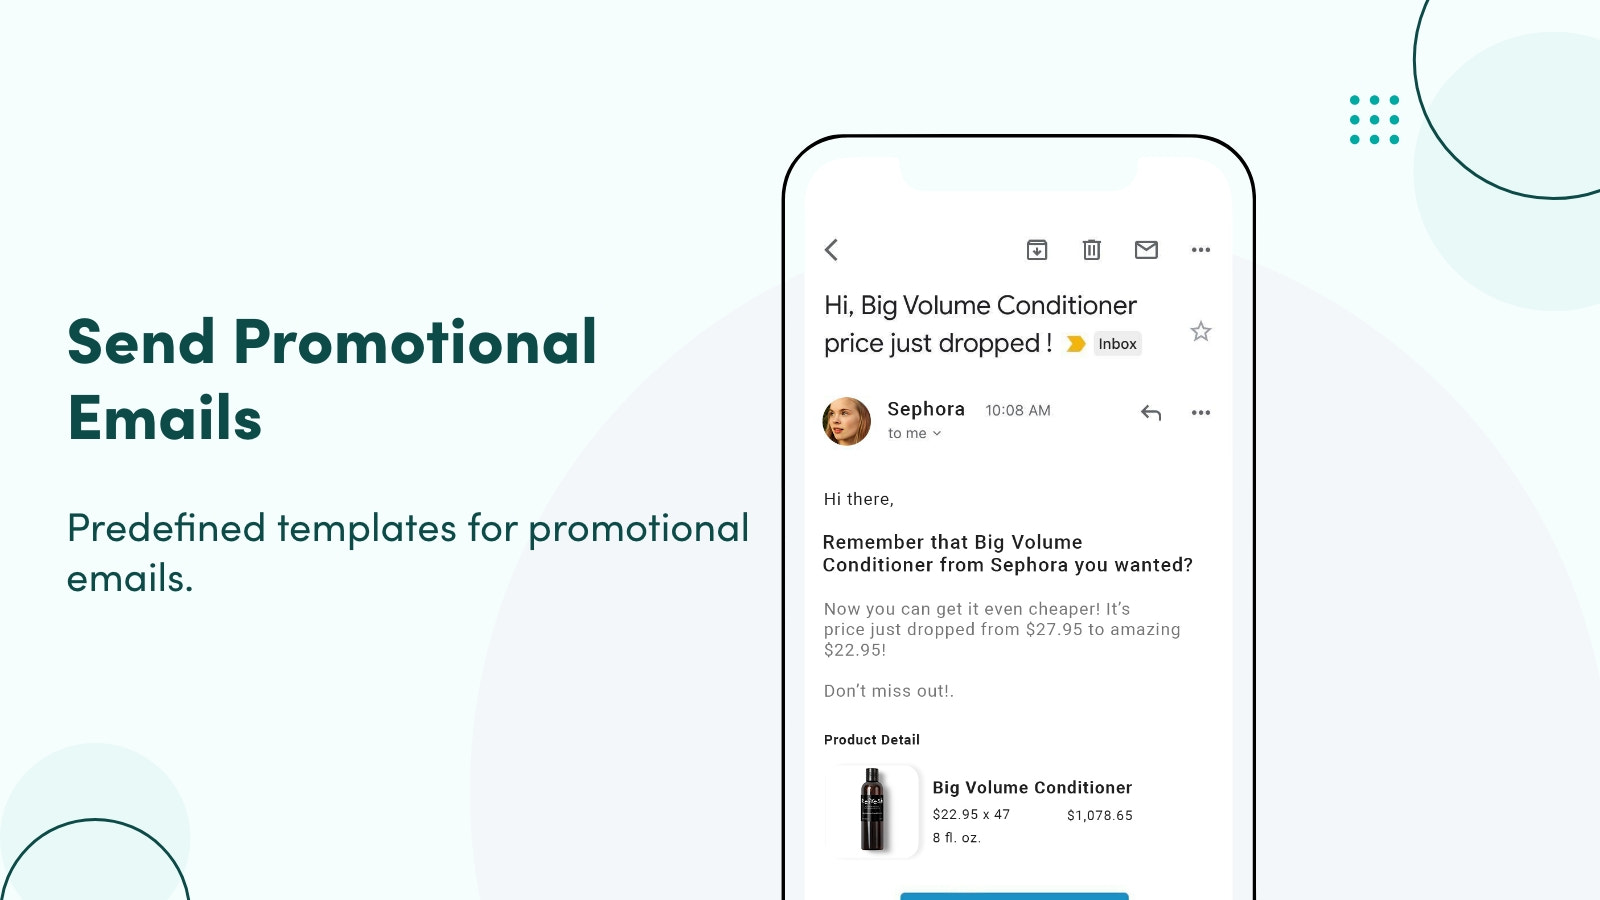 Send promotional emails with predefined templates